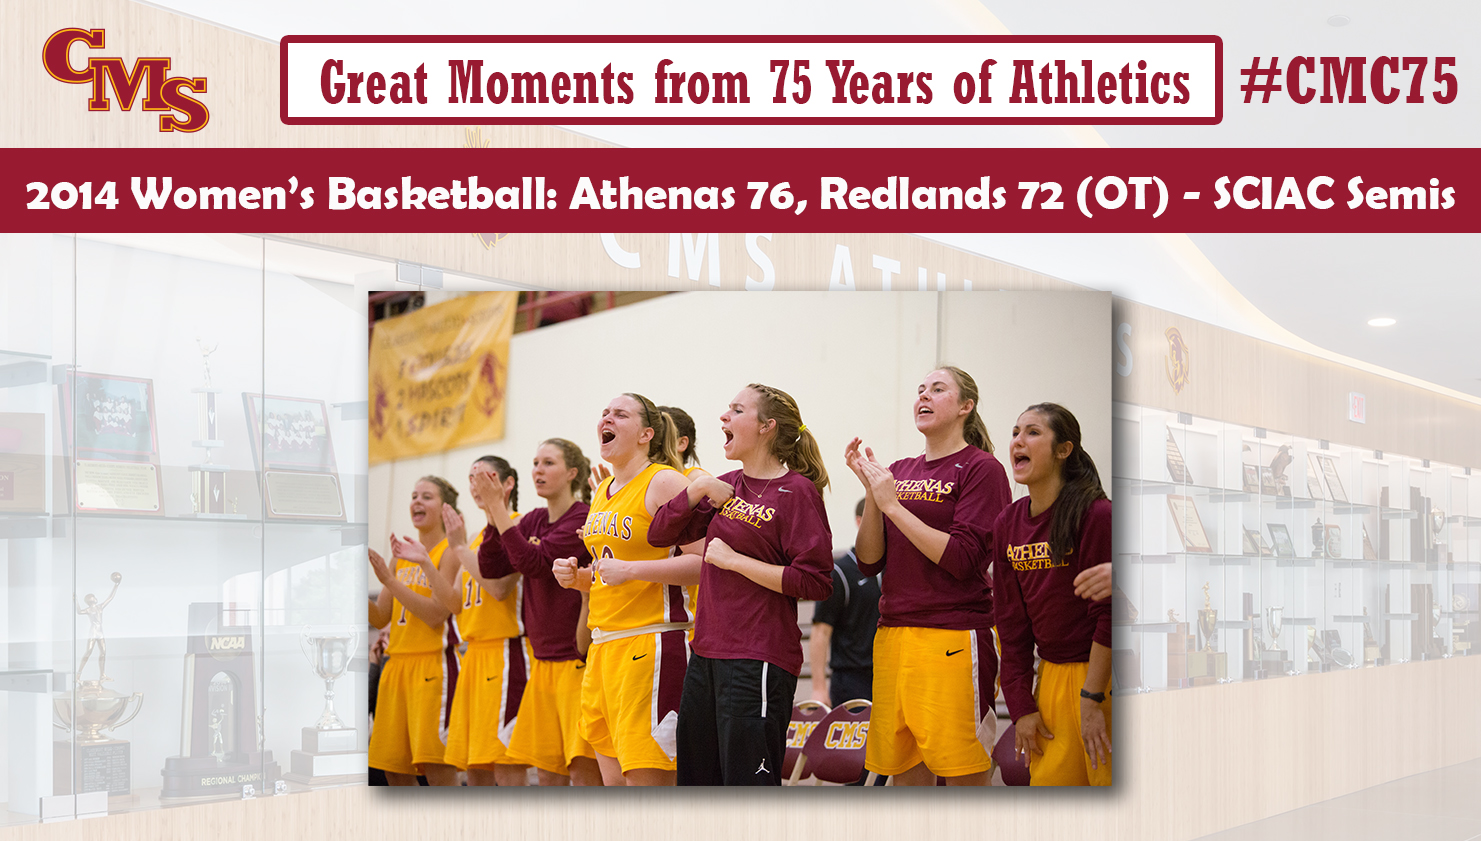 Picture of the team bench celebrating. Words over the photo read: Great Moments from 75 Years of Athletics. 2014 Women's Basketball: Athenas 76, Redlands 72 (OT)